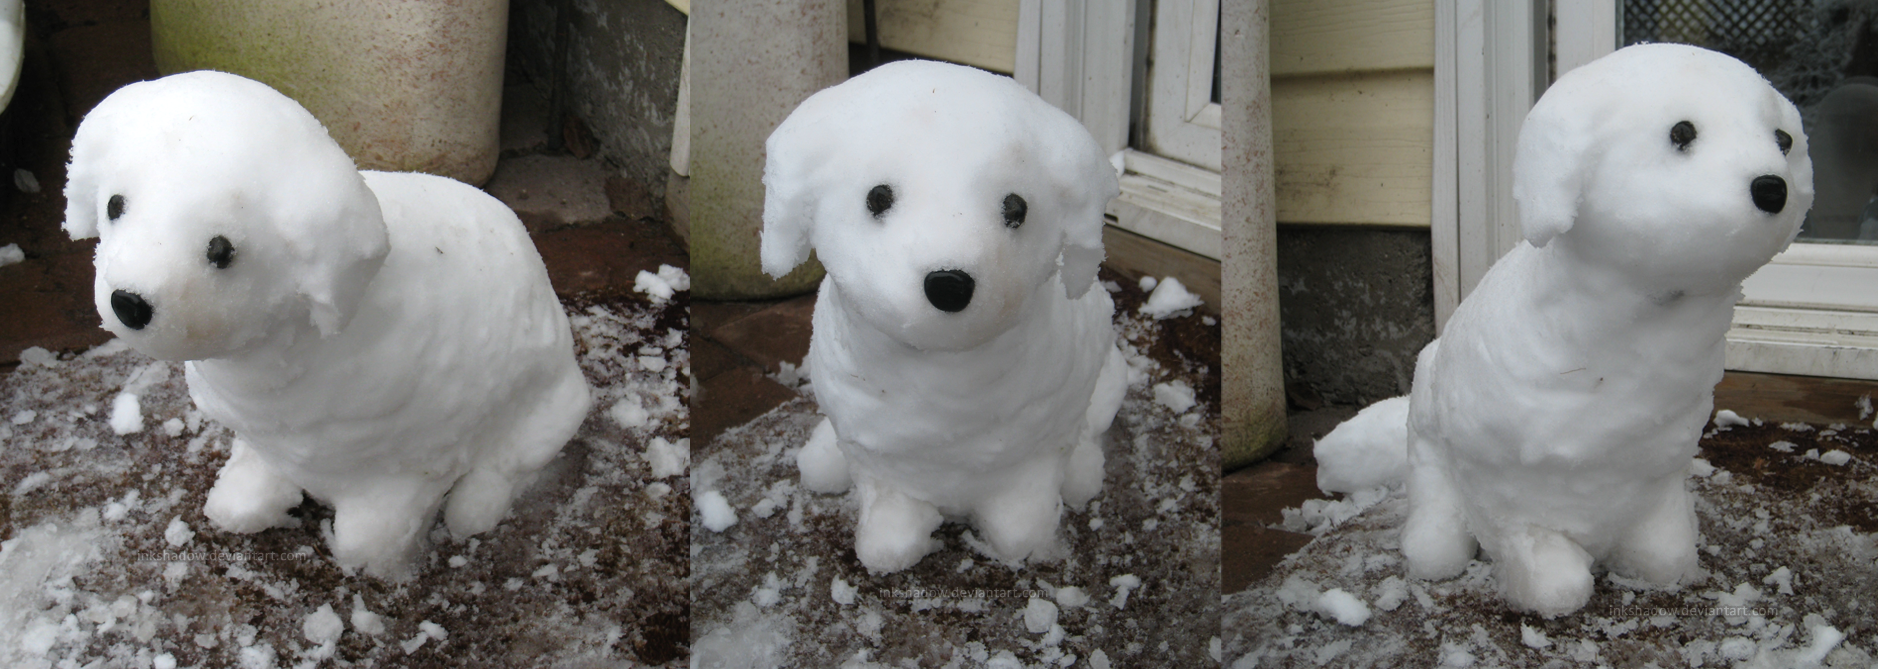 puppy_made_of_snow__by_inkshadow-d5rk5rc